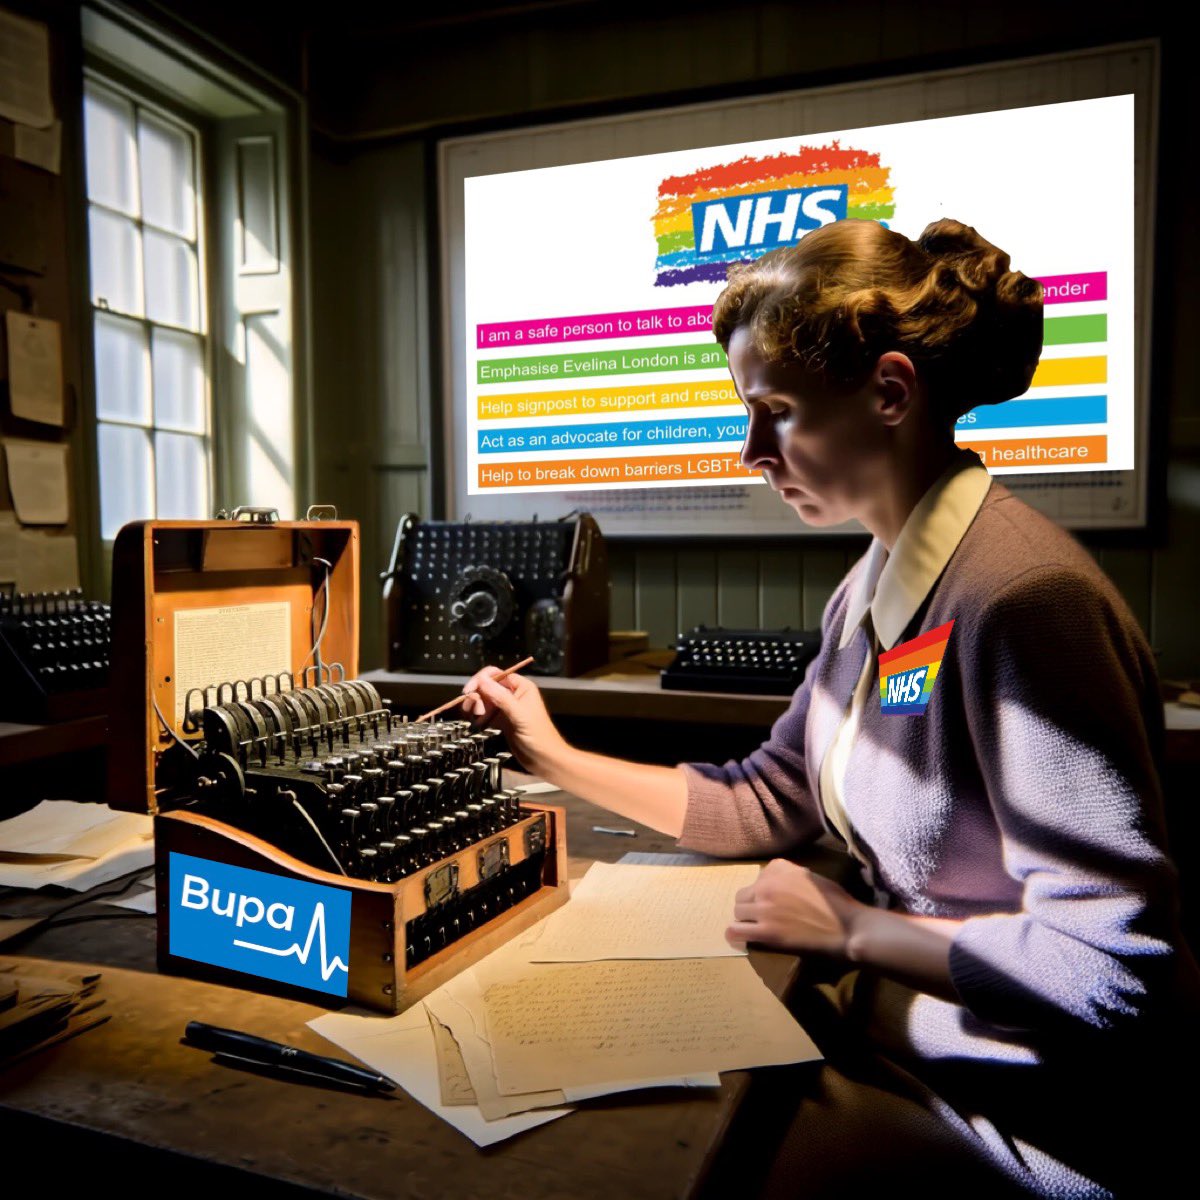 A codebreaker at the Bletchley Park NHS Foundation Trust decrypts an enemy message using a captured Enigma Machine: